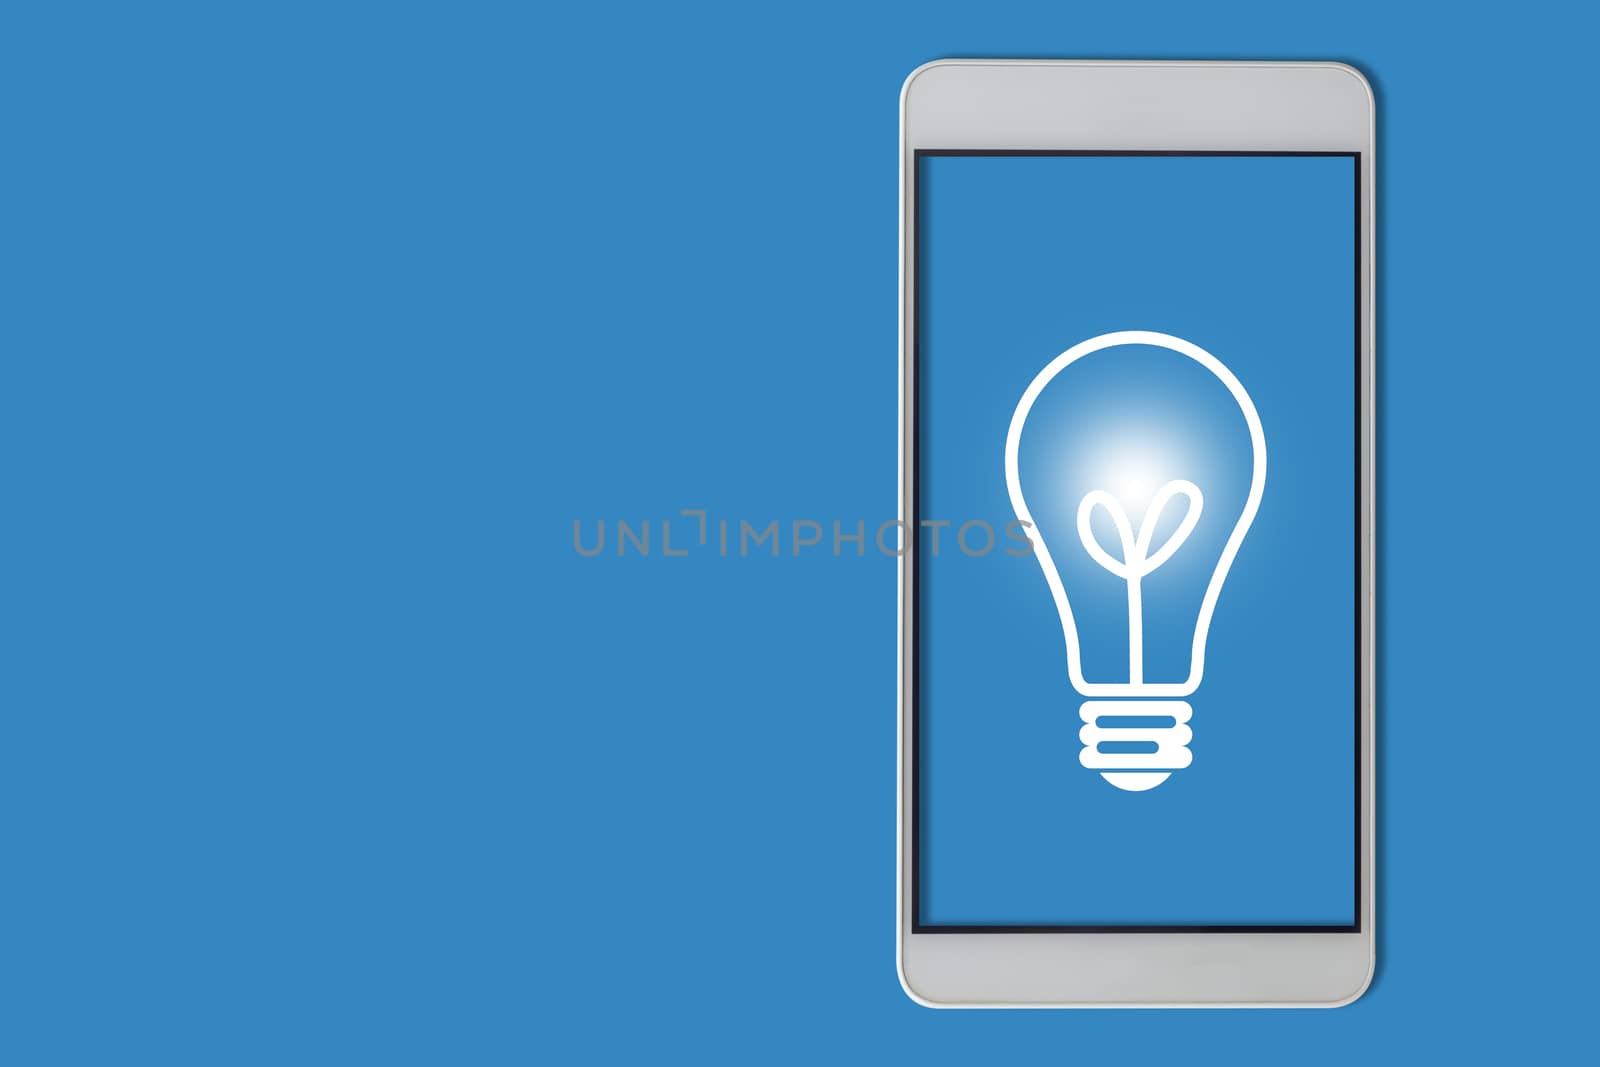 Idea and inspiration concept, business creativity, light bulb and mobile phone on blue background